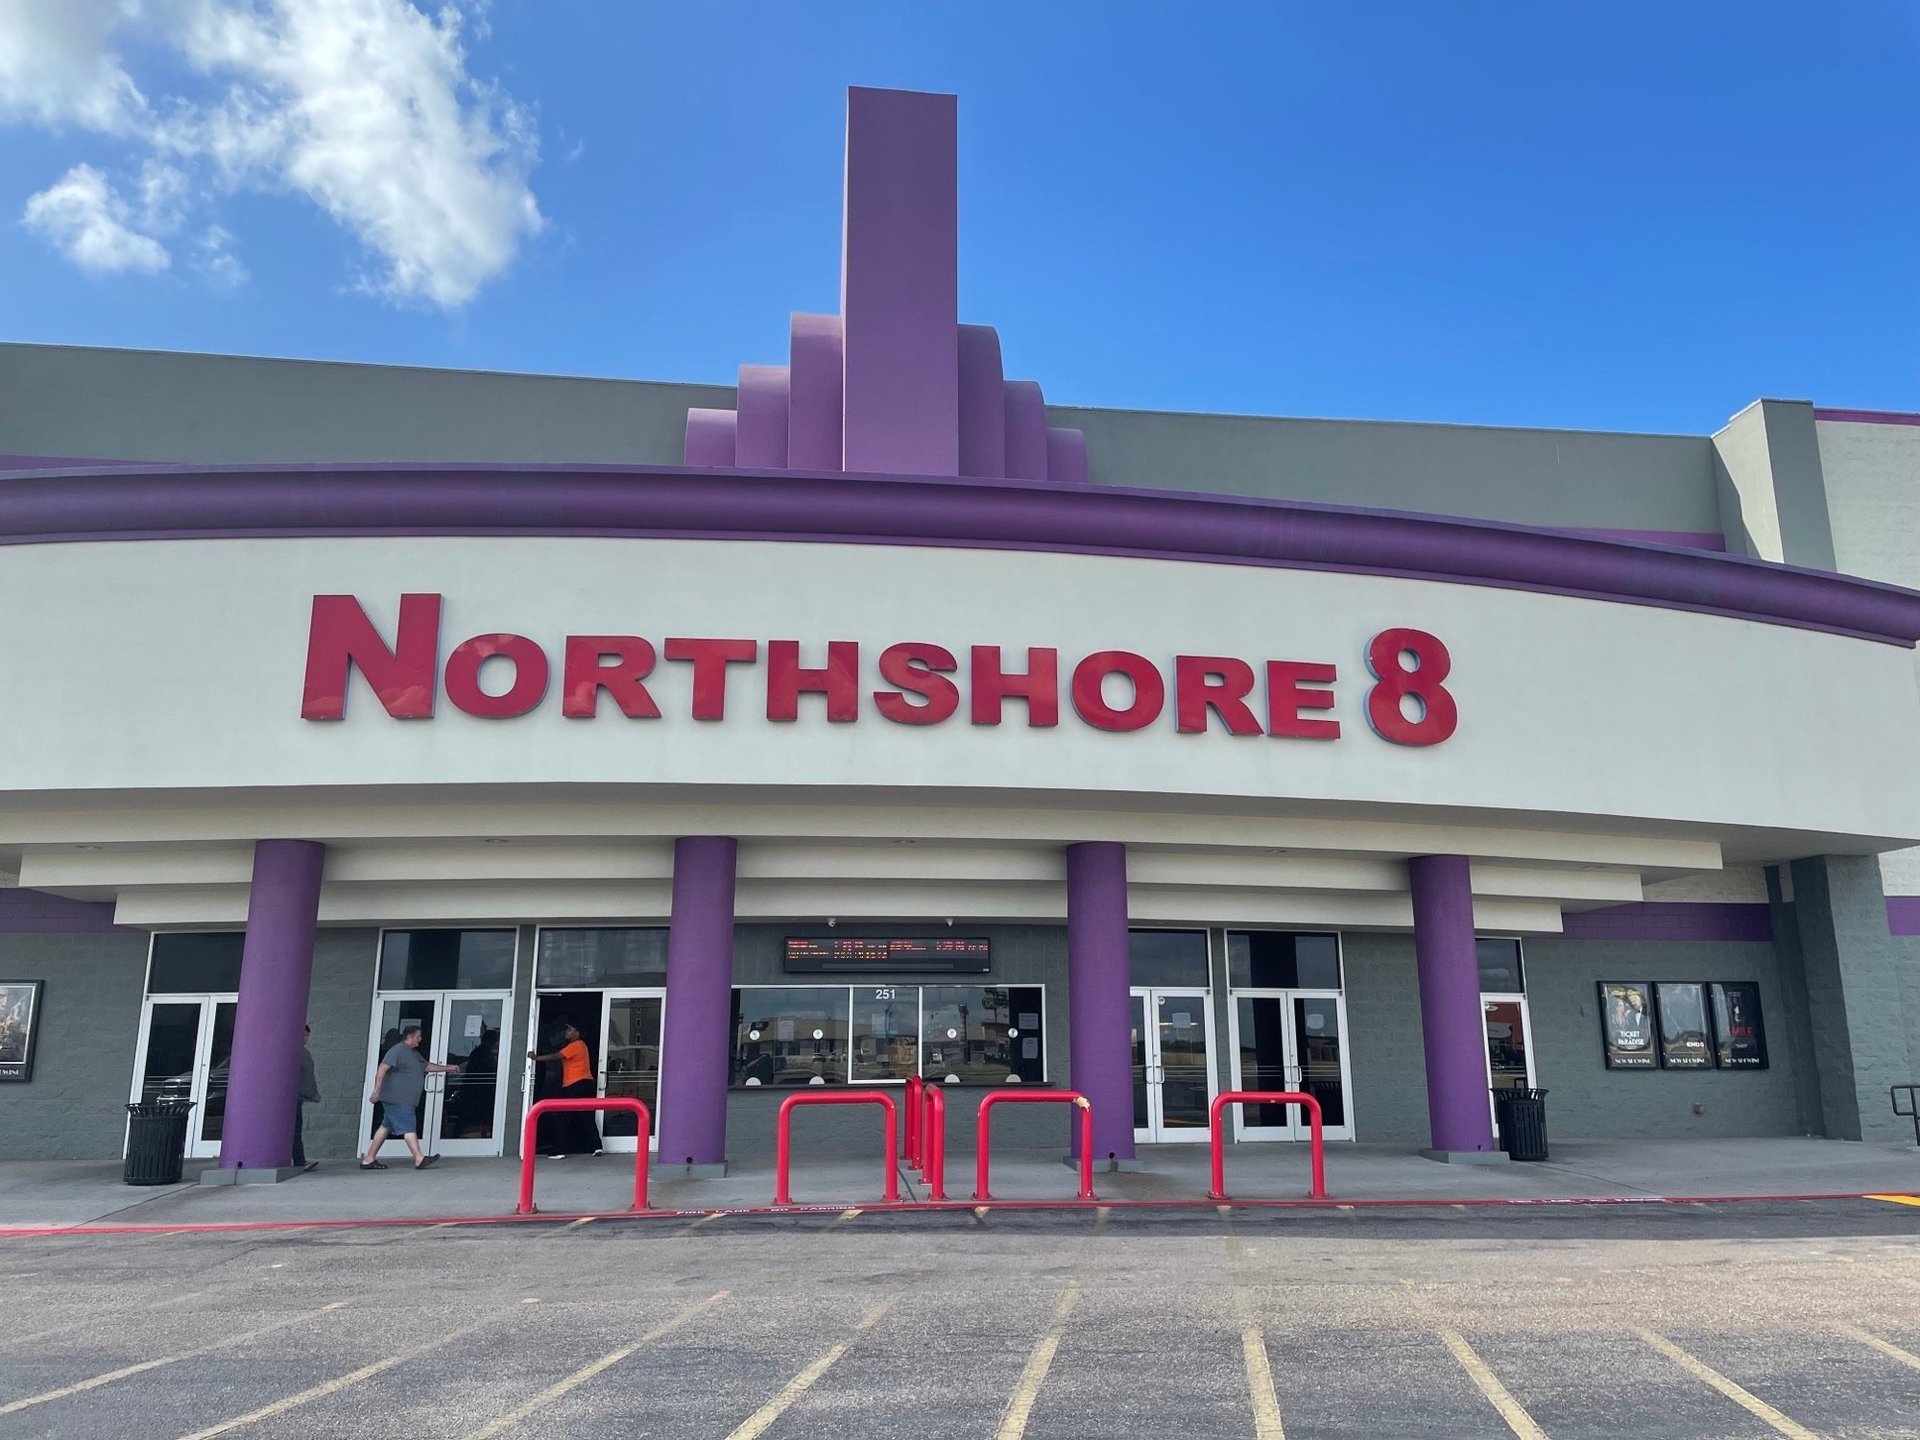 exterior of theatre showing northshore 8 sign